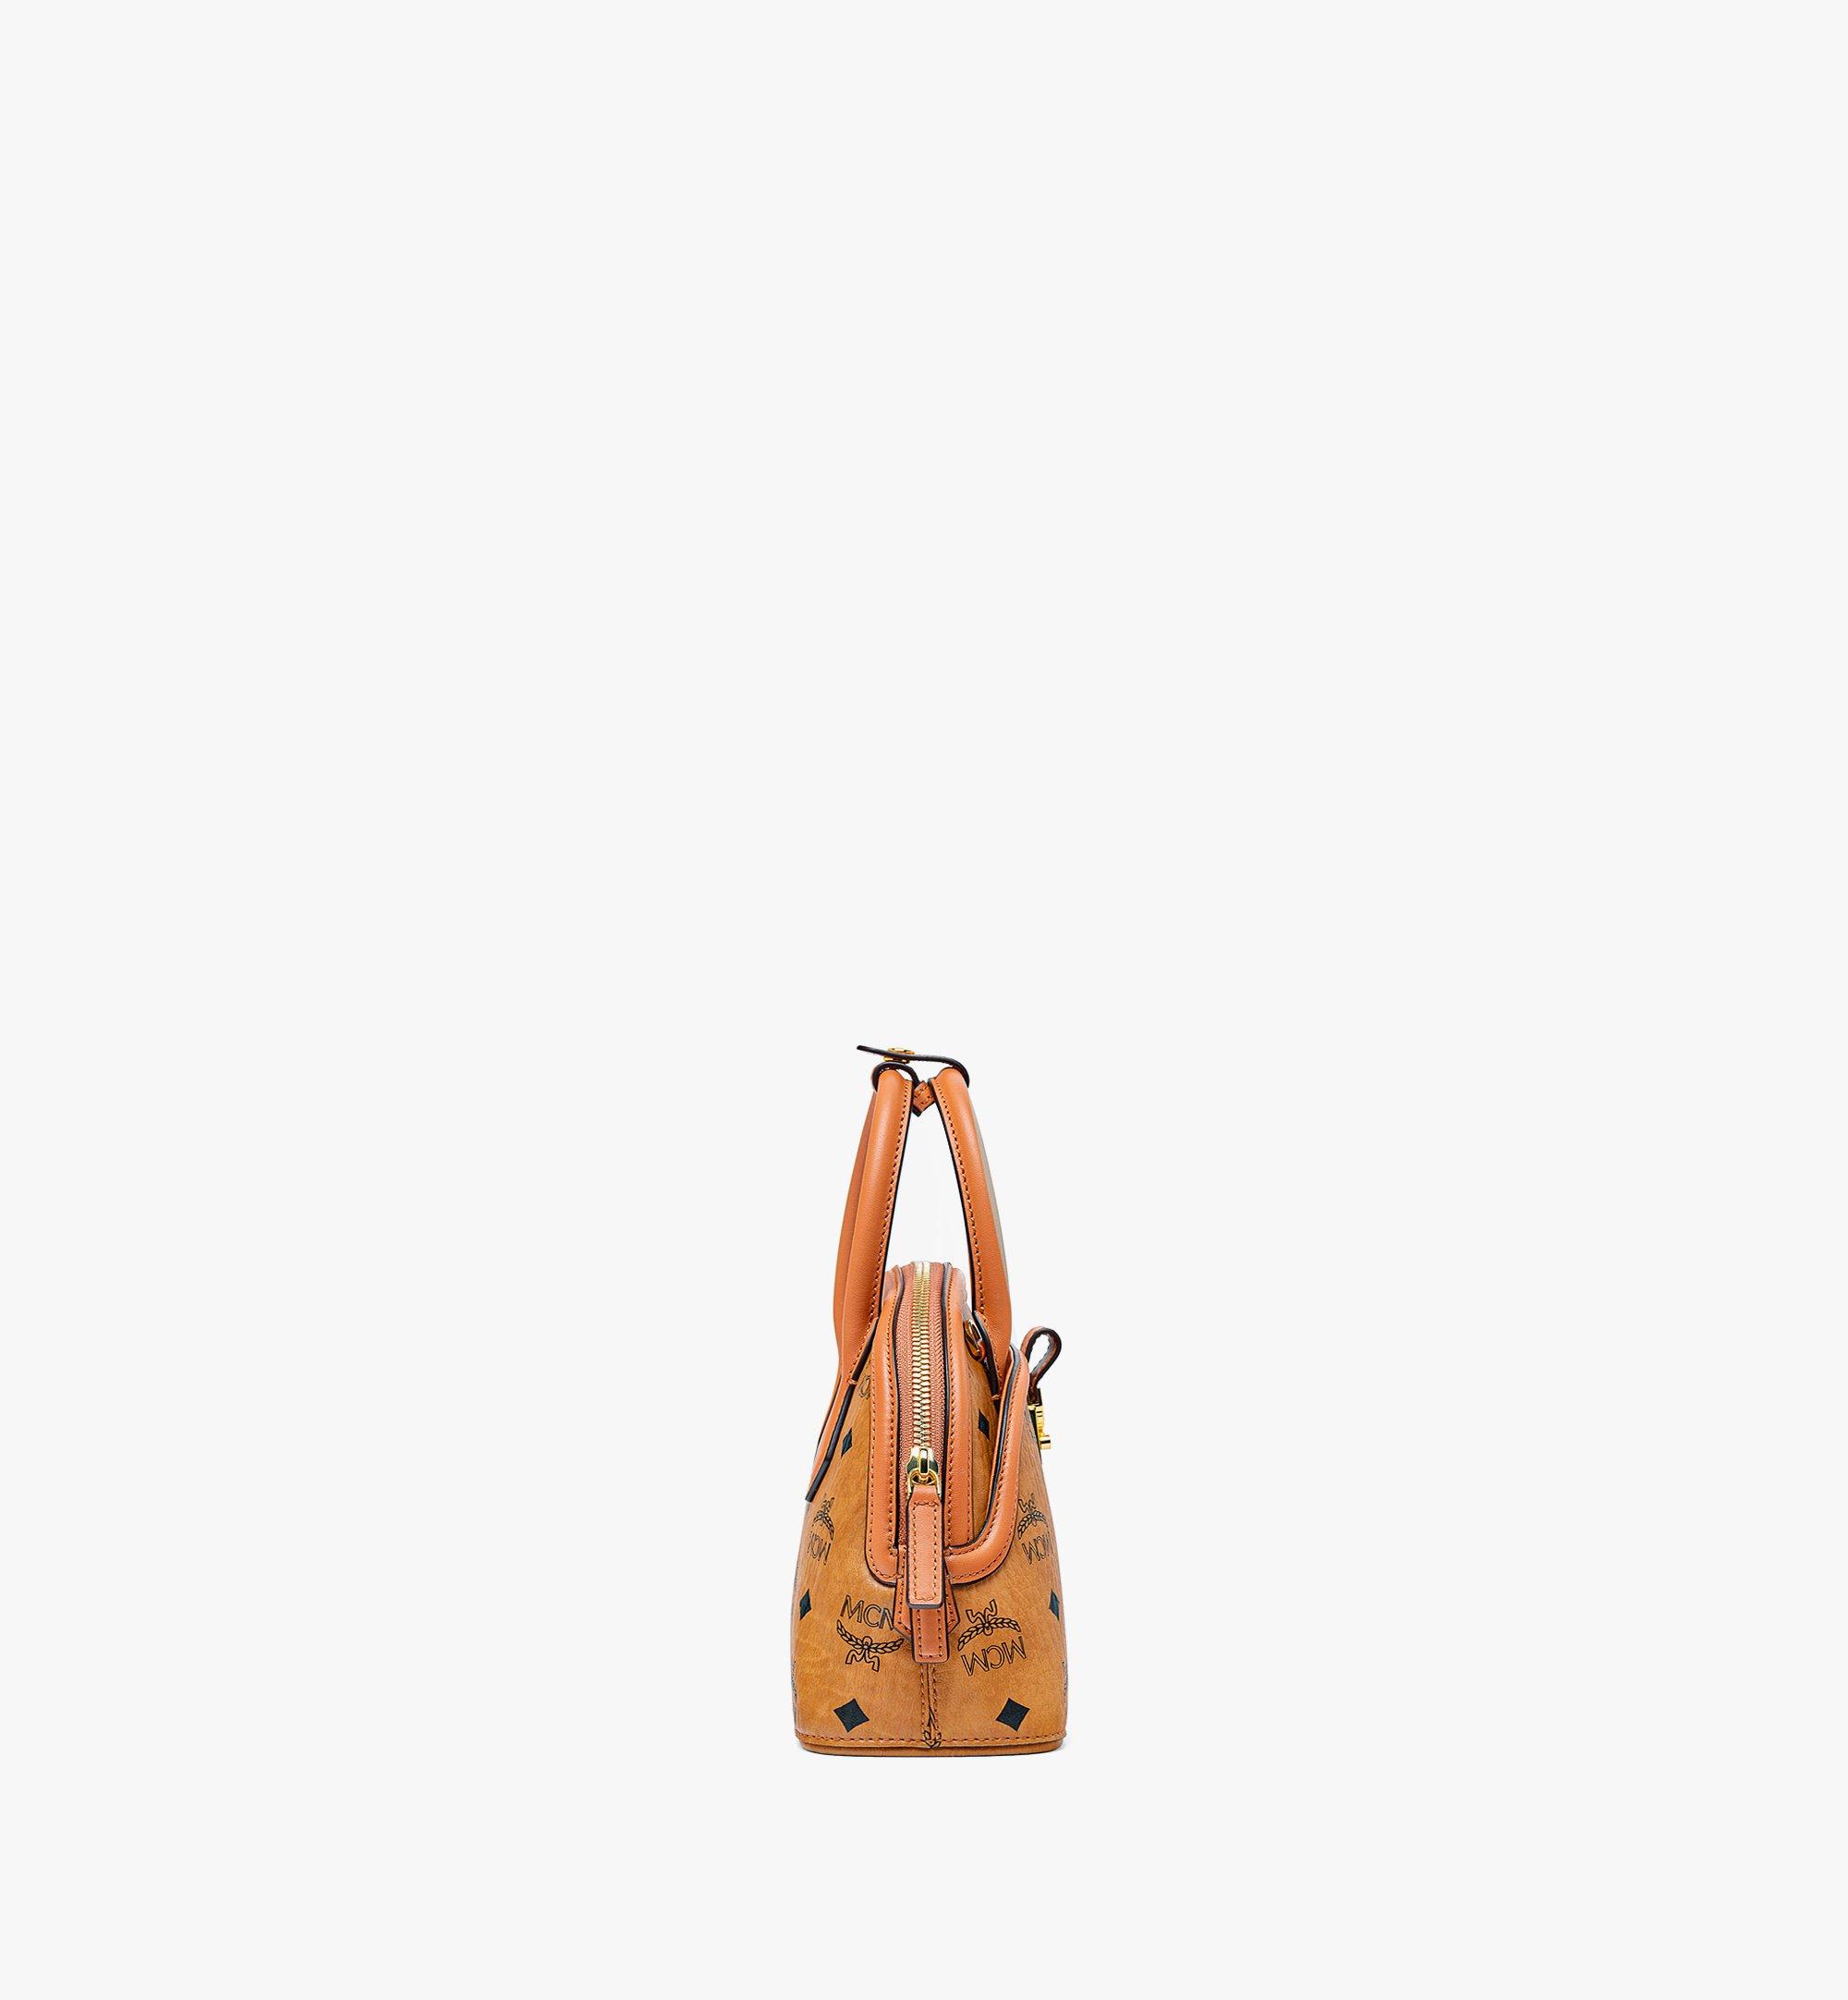 MCM Tracy Tote in Visetos Cognac MWTBSNN02CO001 Alternate View 1